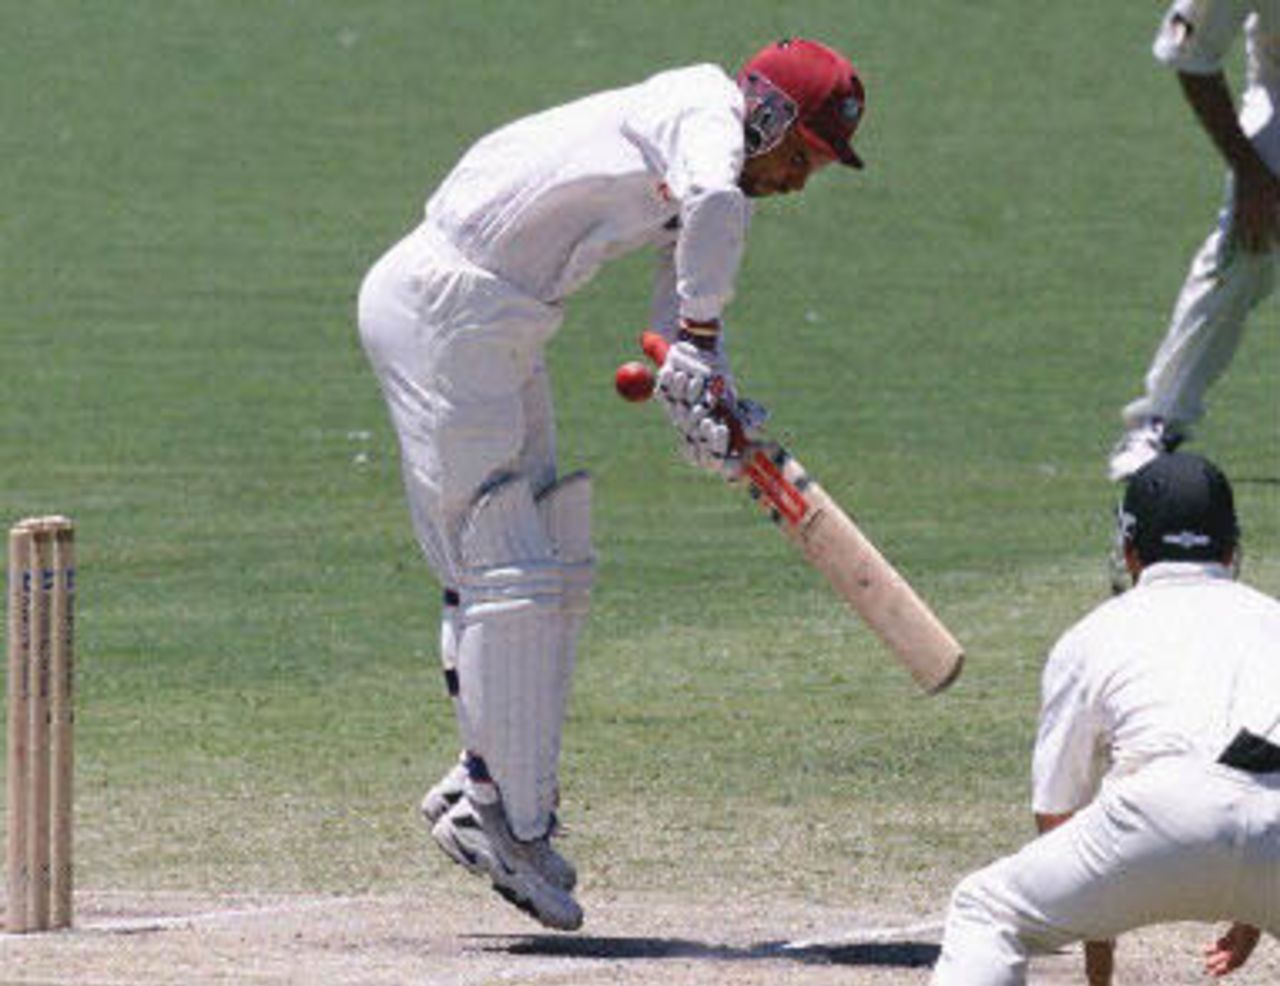 West Indies batsman and captain Jimmy Adams bounces on his toes after being hit by a delivery from Australian bowler Jason Gillespie on day four of the third Test match at the Adelaide Oval, 18 December 2000. Adams was dismissed for three runs in the West Indies second innings, with Australia now only needing to score 32 runs 19 December to win the match with six wickets in hand.